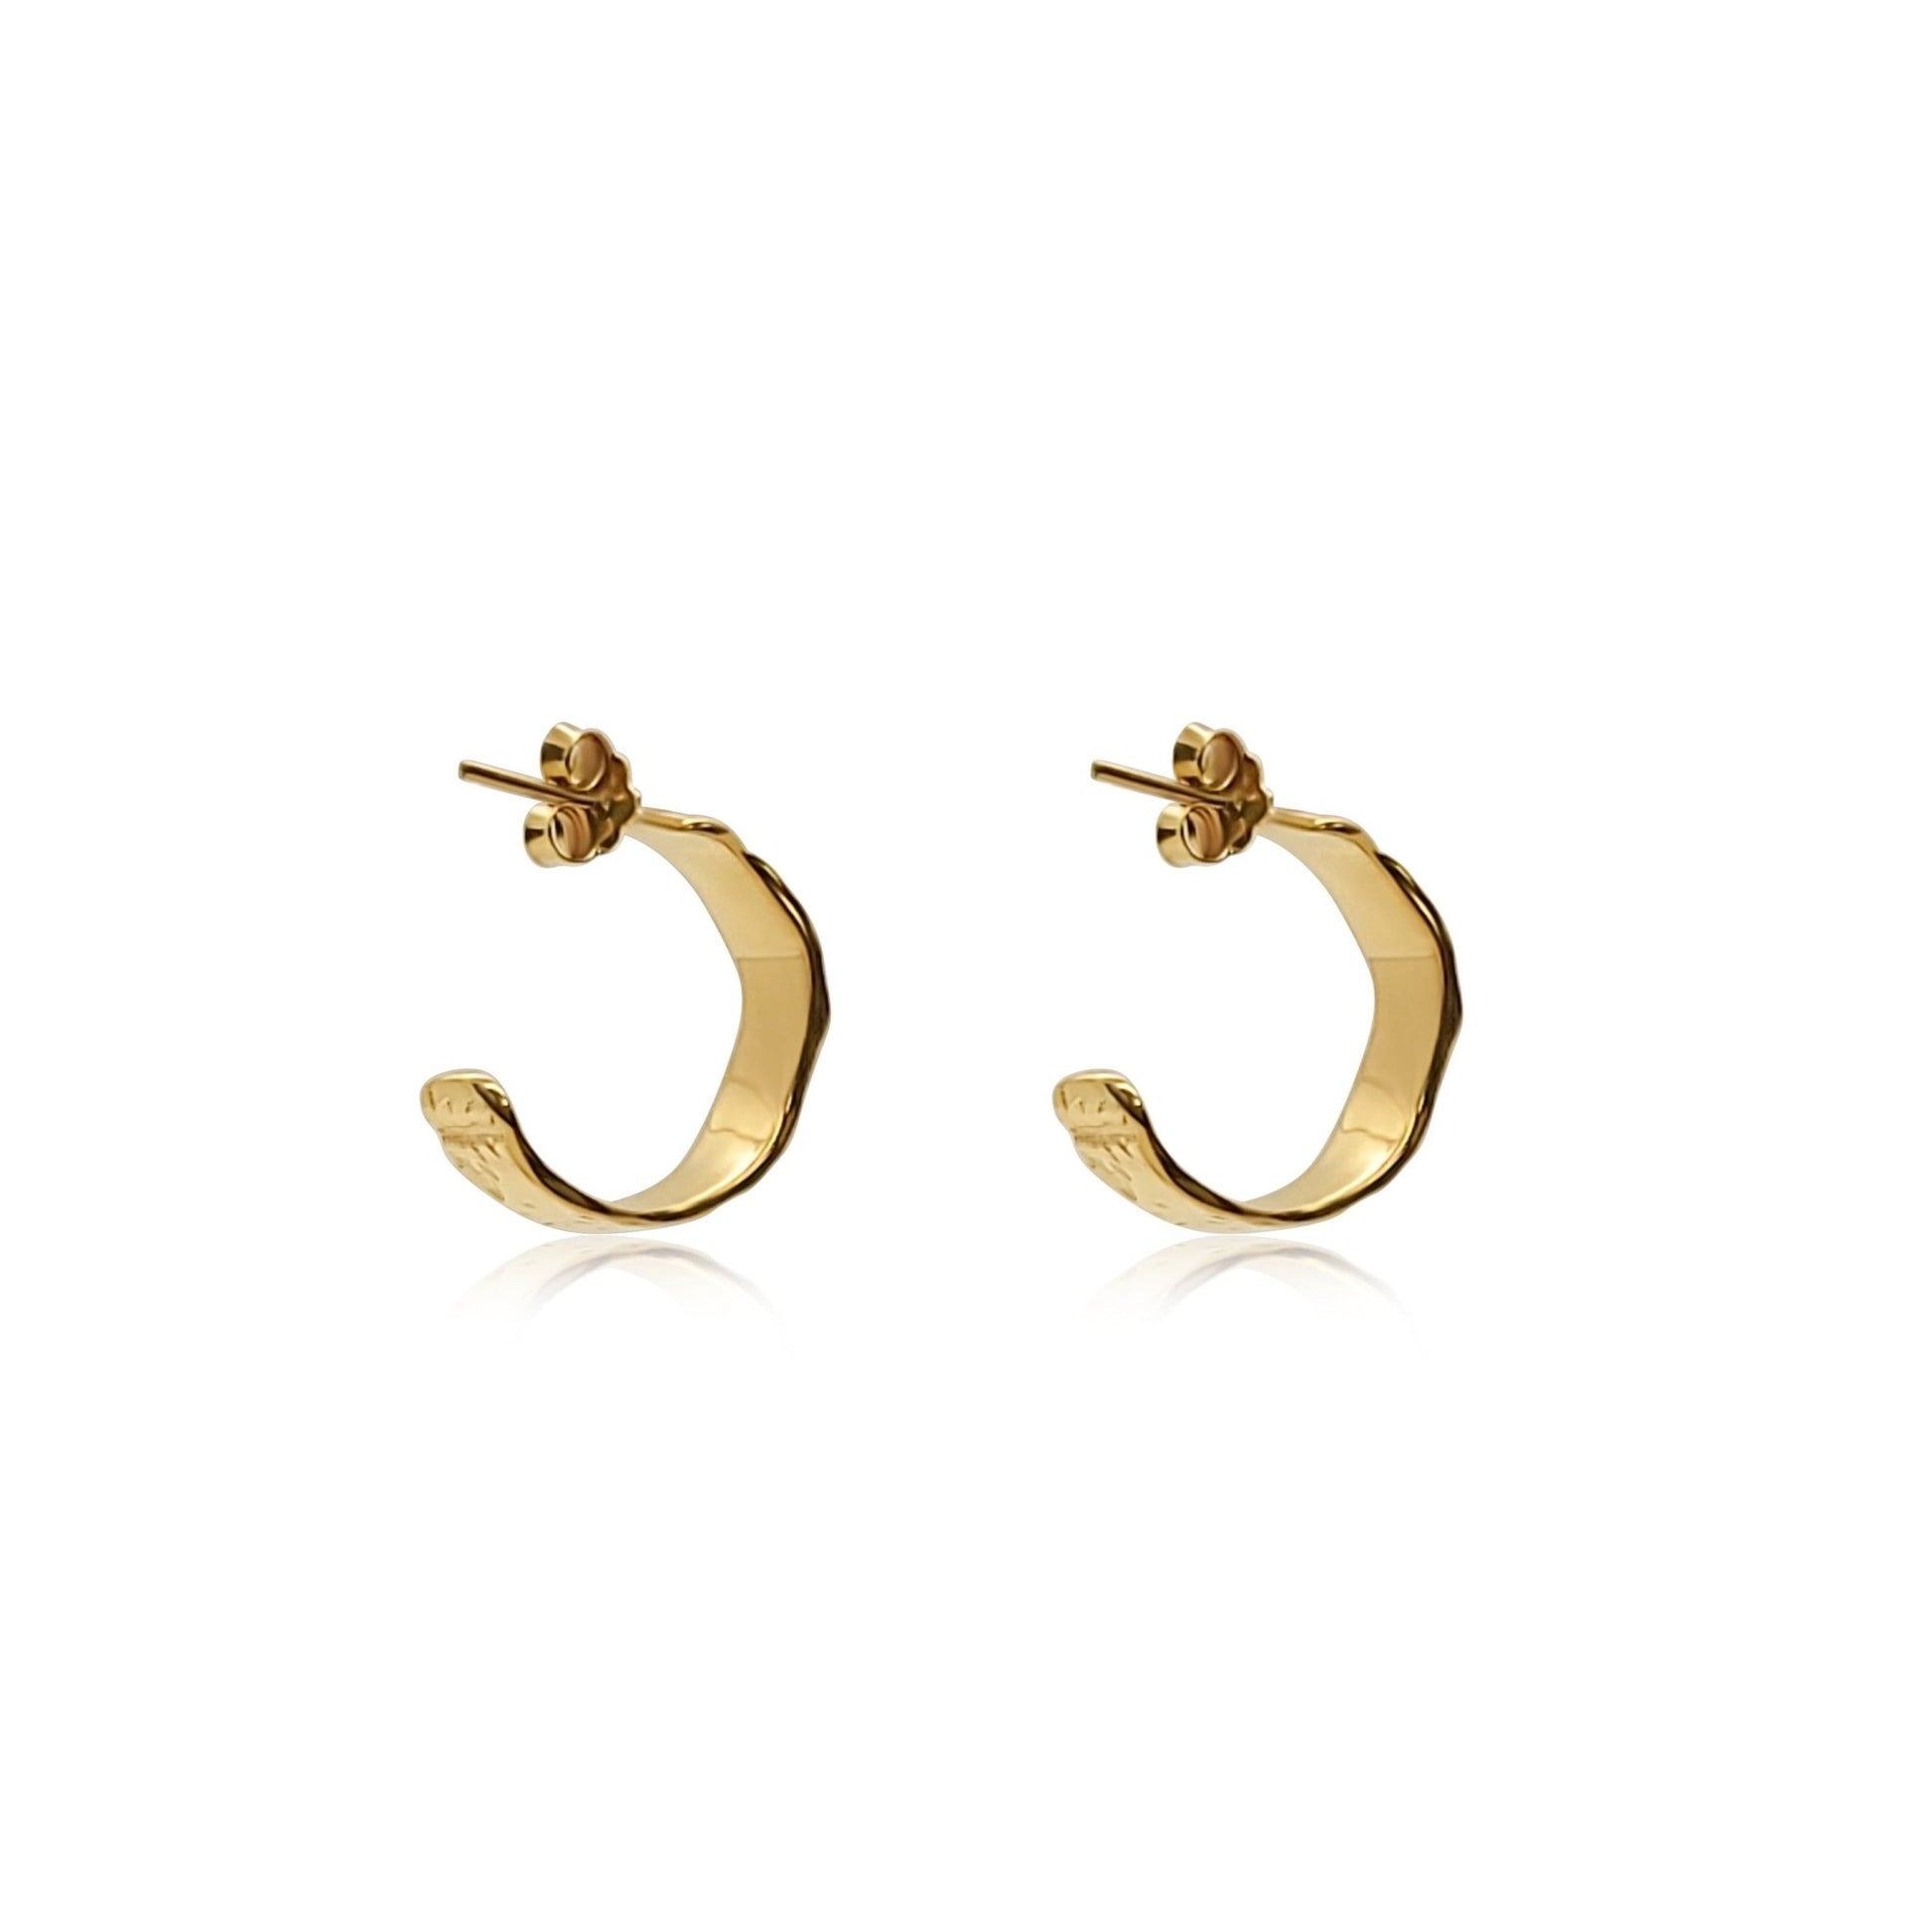 18k gold vermeil classic sterling silver hoops earrings with natural texture back view